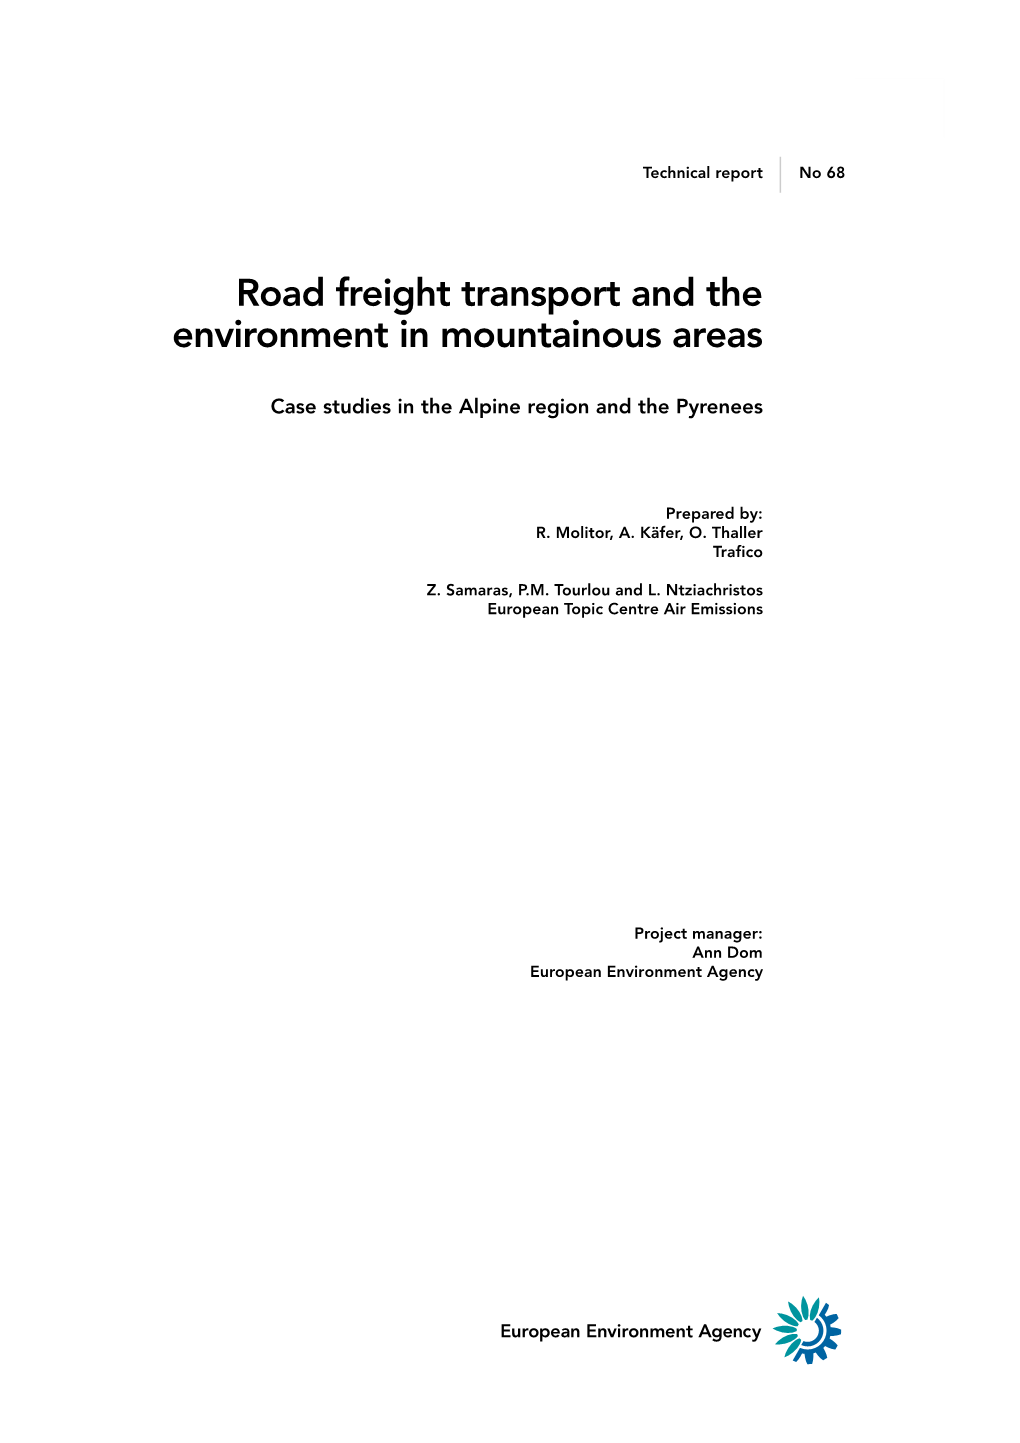 Road Freight Transport and the Environment in Mountainous Areas